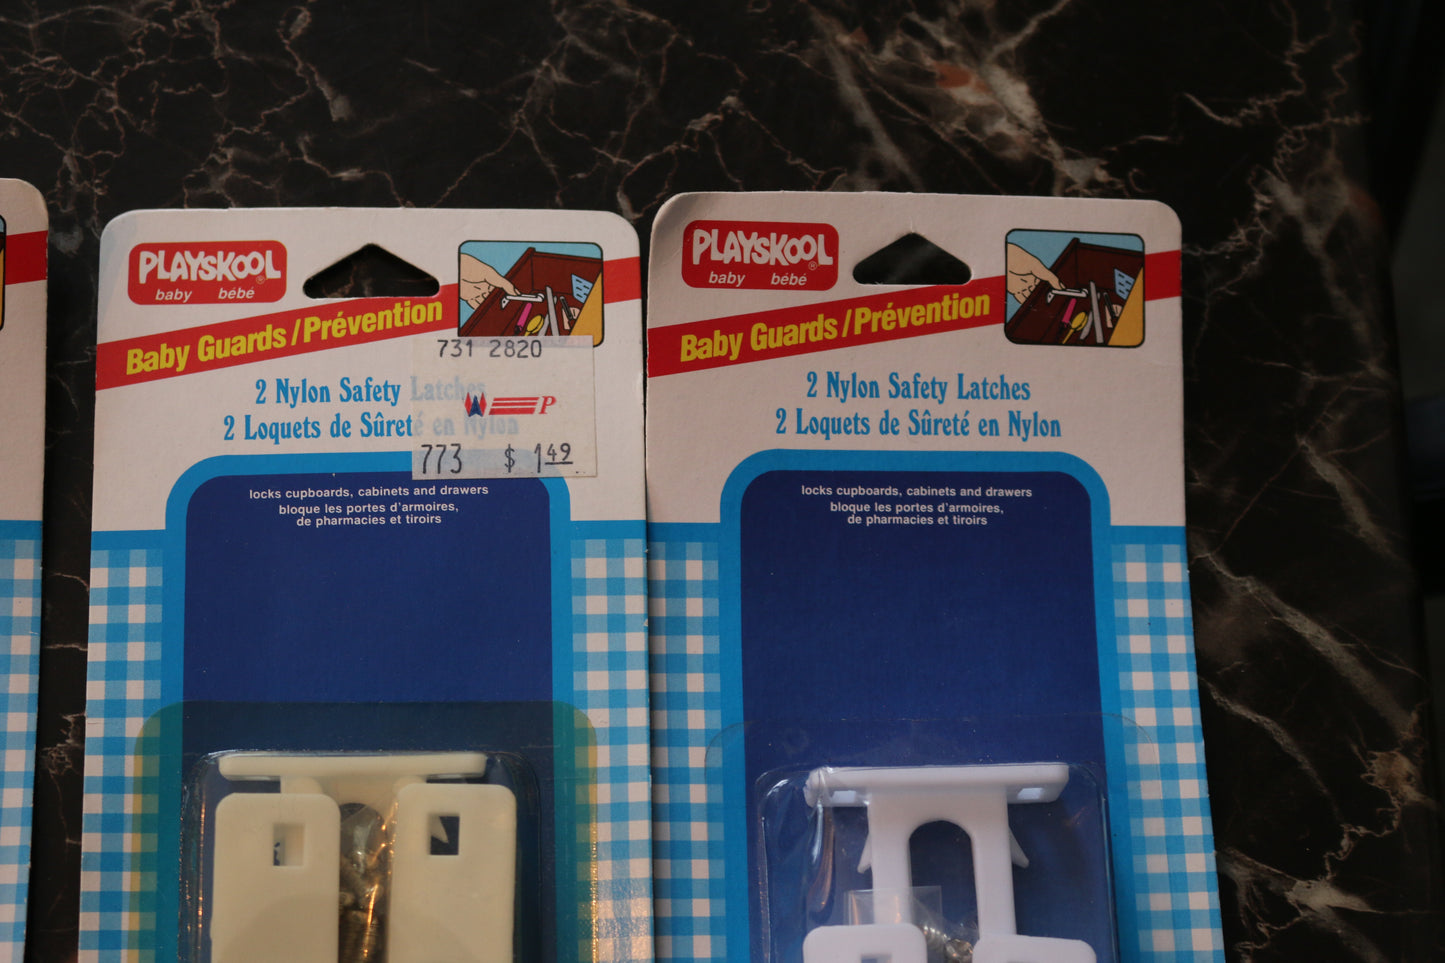 Lot of 4 Vintage Playskool baby guards nylon safety latches #4129 sealed